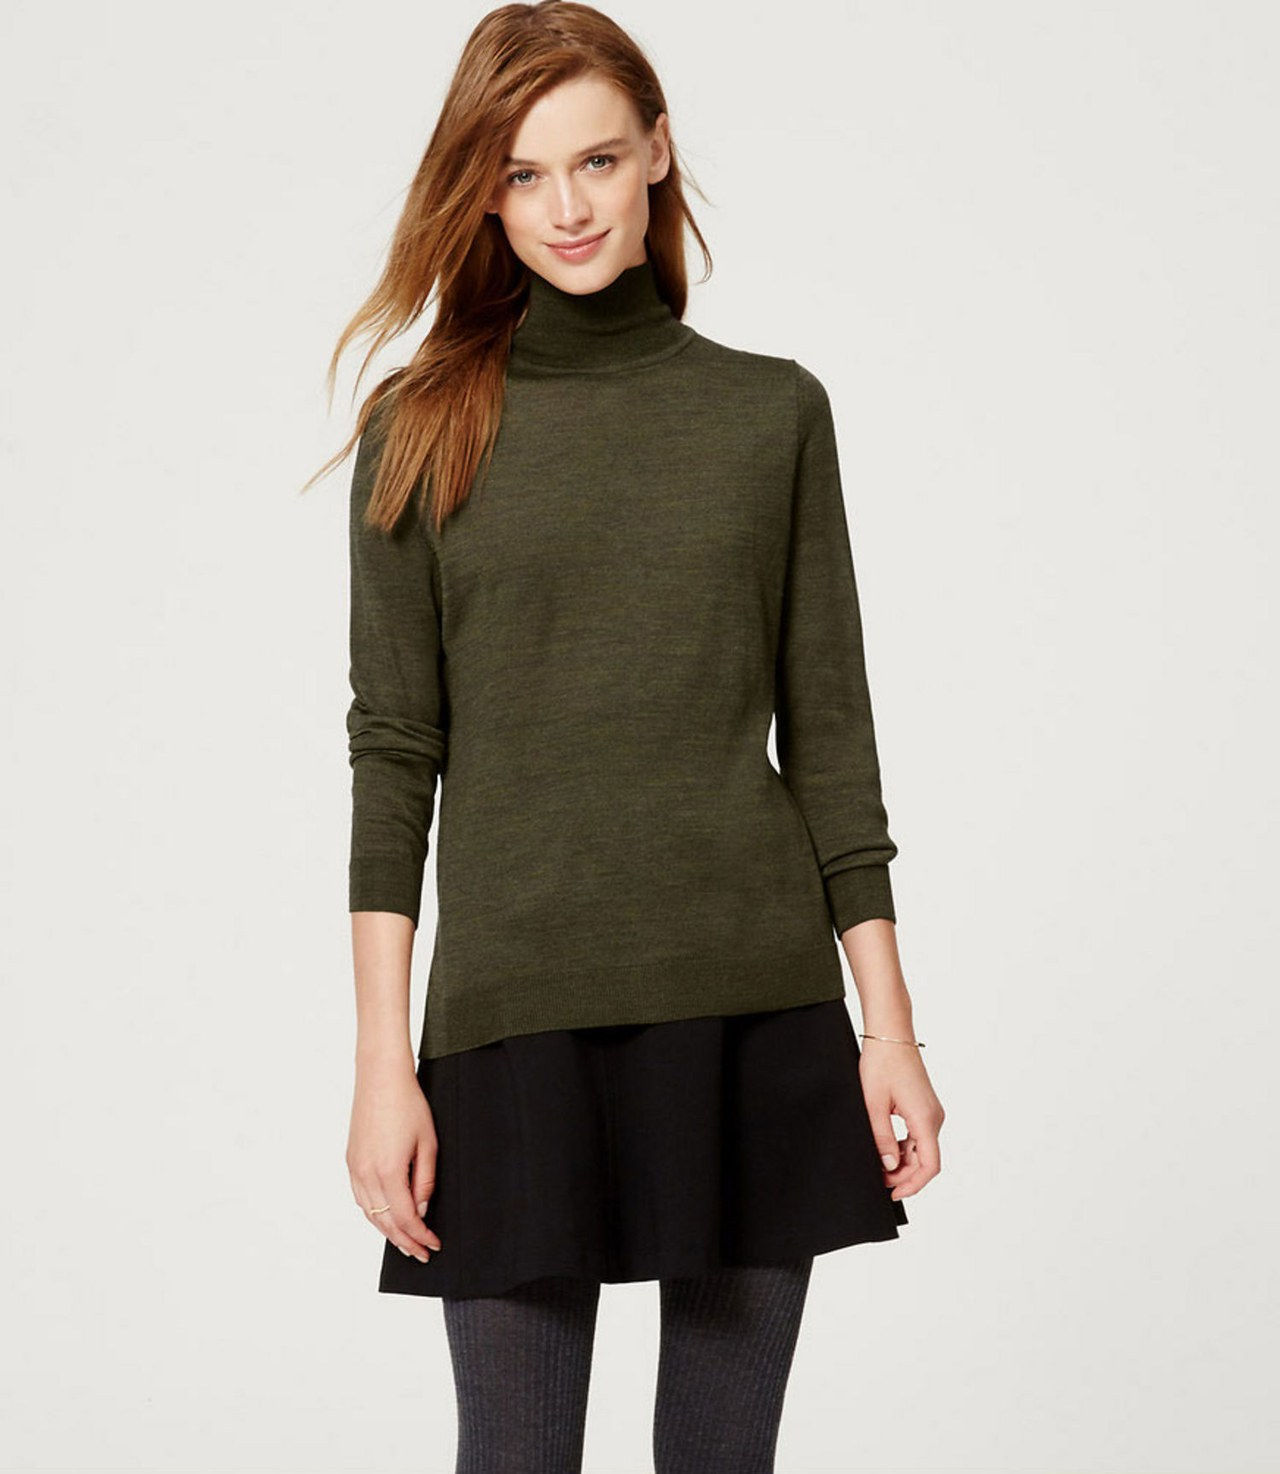 Dachgeschoss turtleneck outfit rory gilmore